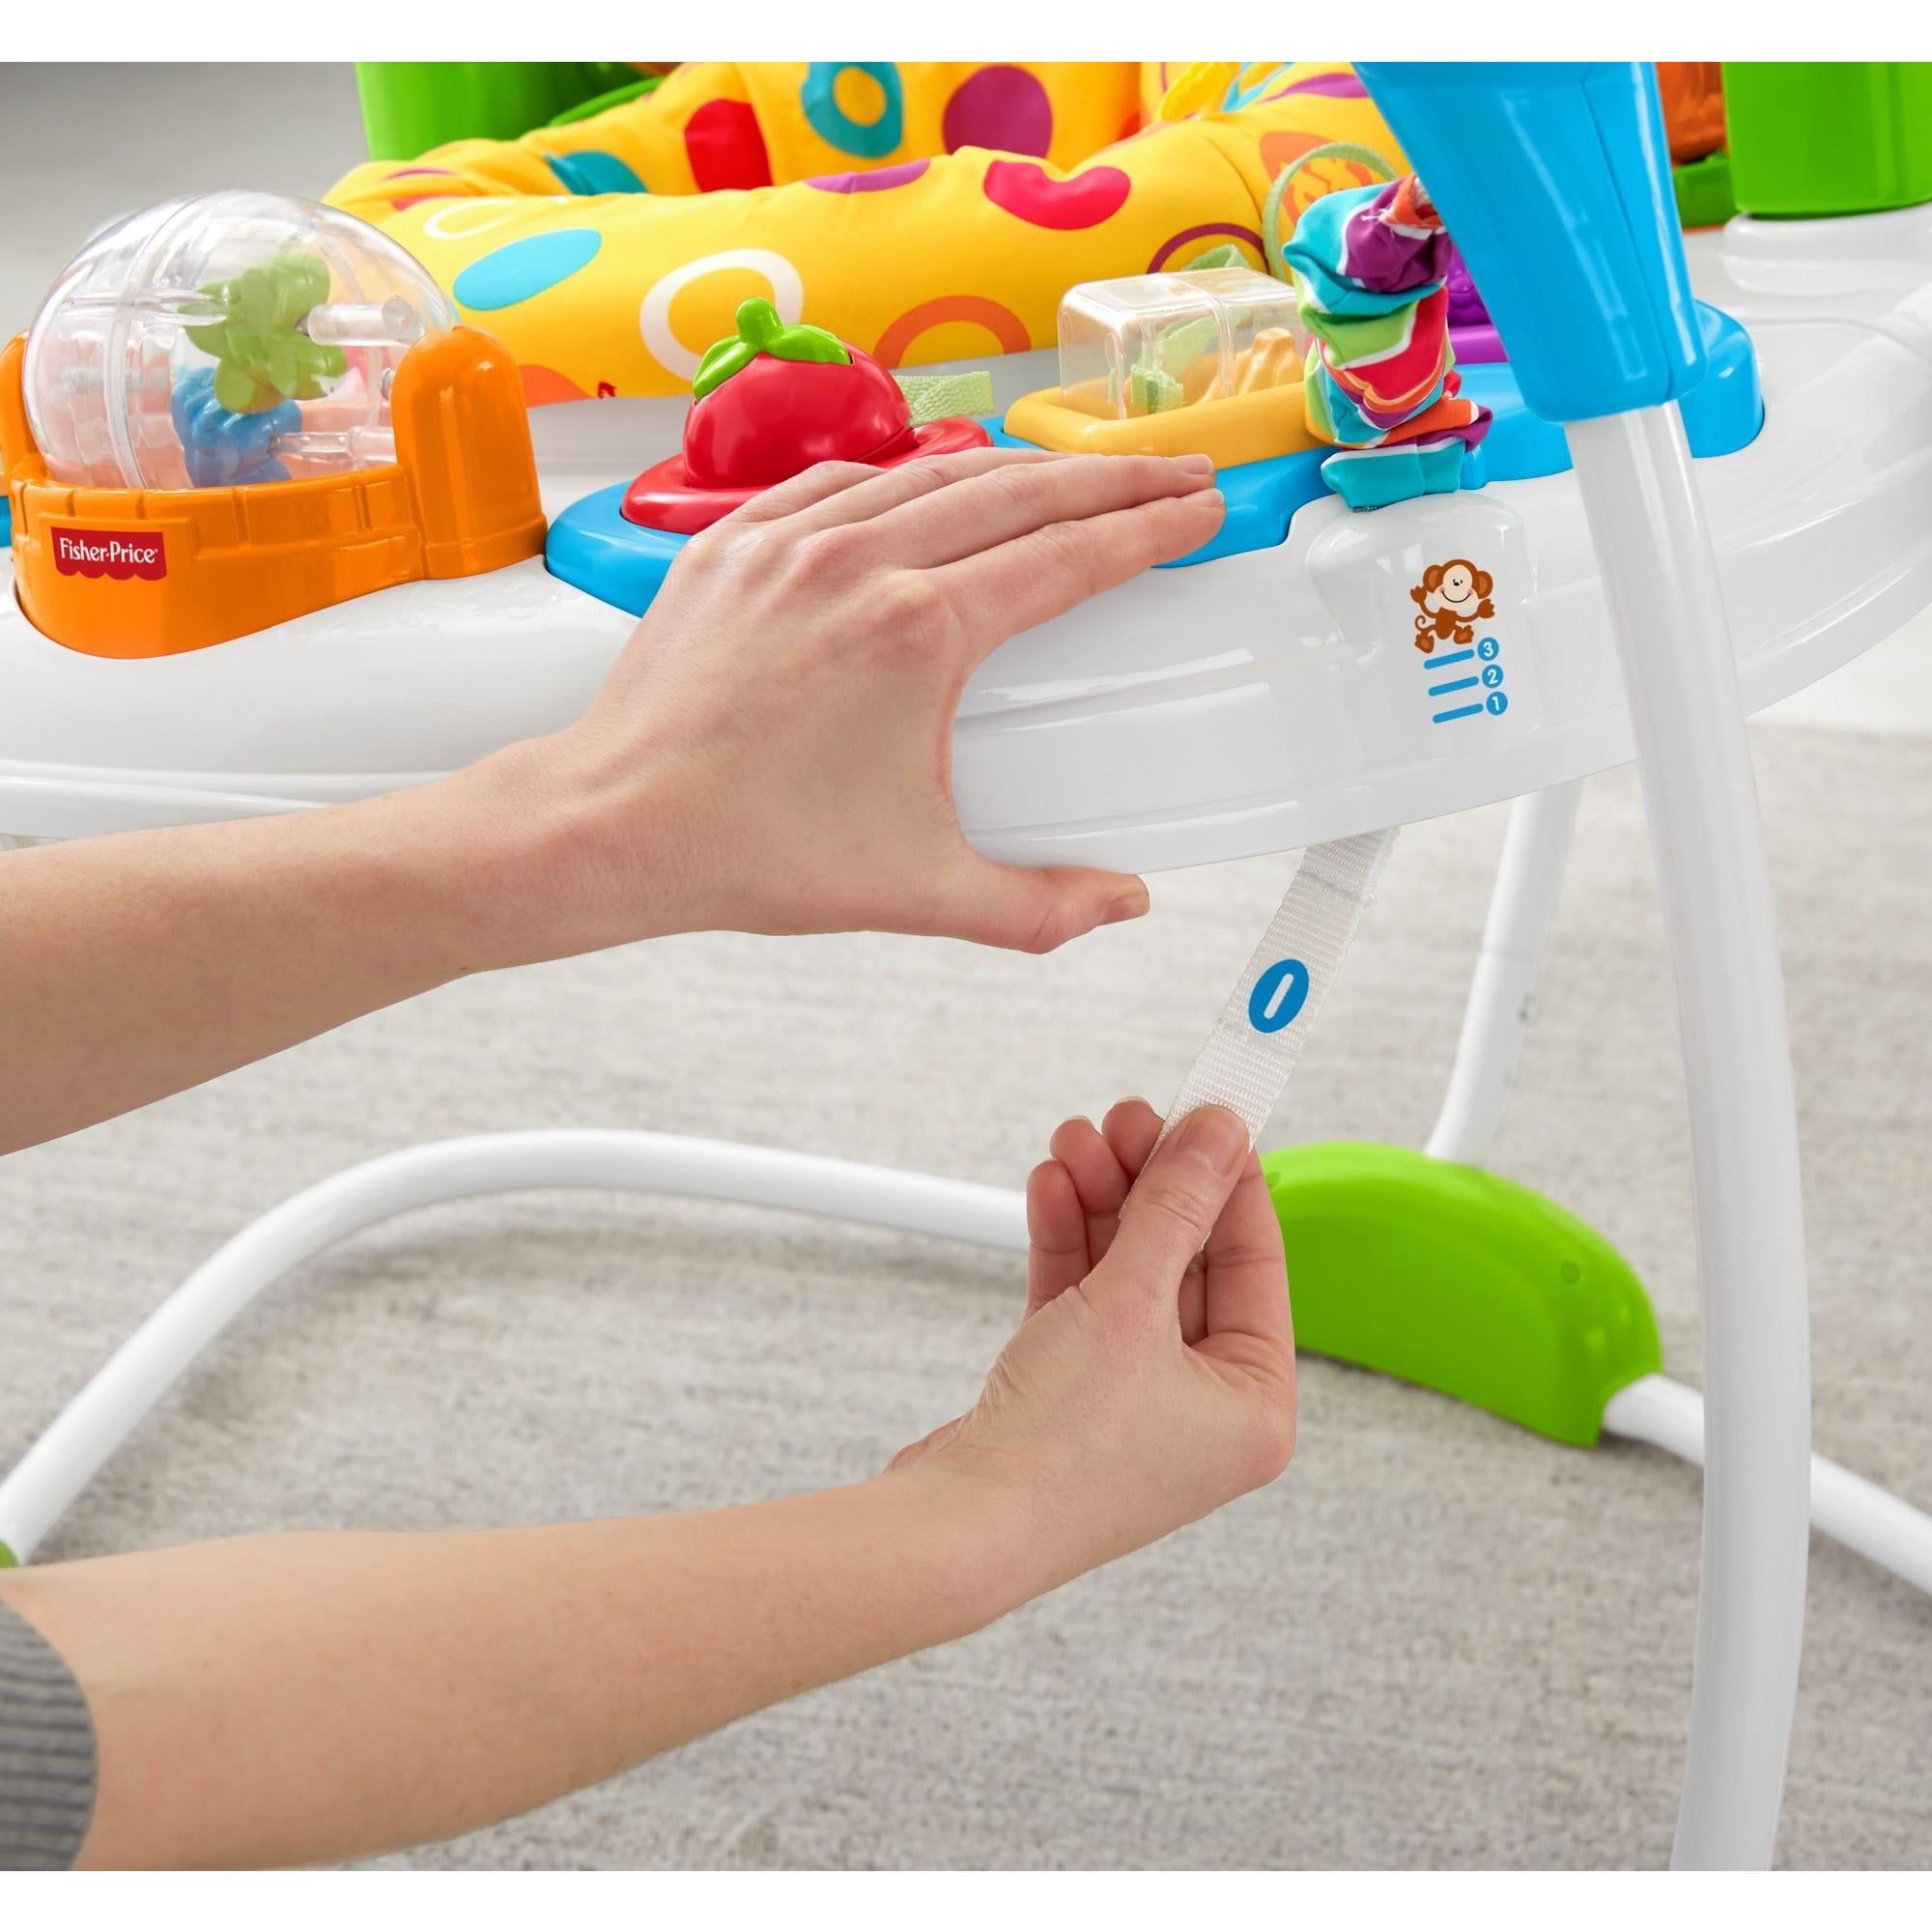 how to put together a jumperoo